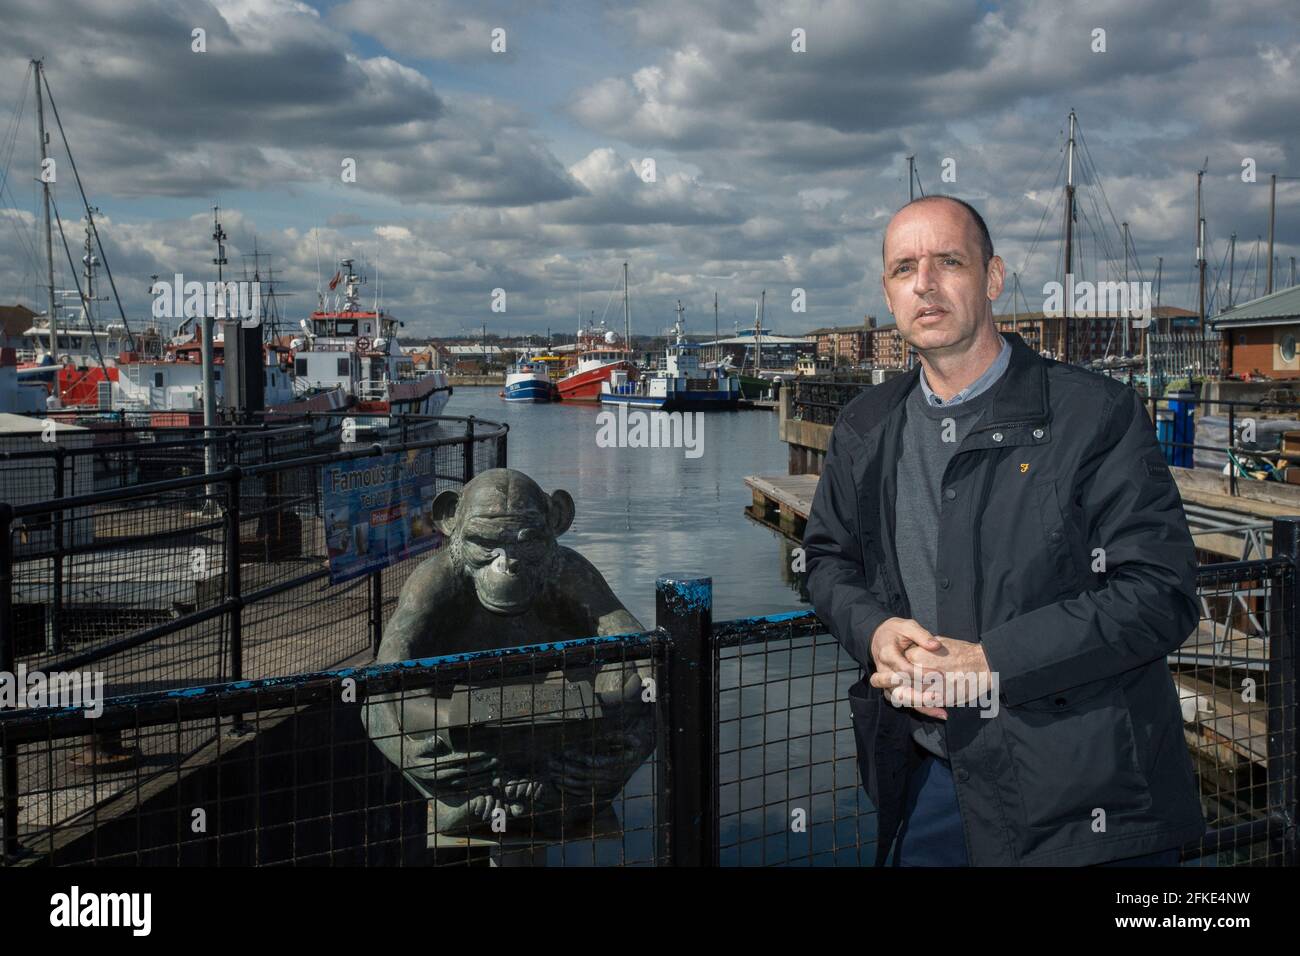 Stuart Drummond standing next to the Monkey sculpture at the Hartlepool Marina on the 13th of April 2021. Stuart Drummond was the first and only direc Stock Photo